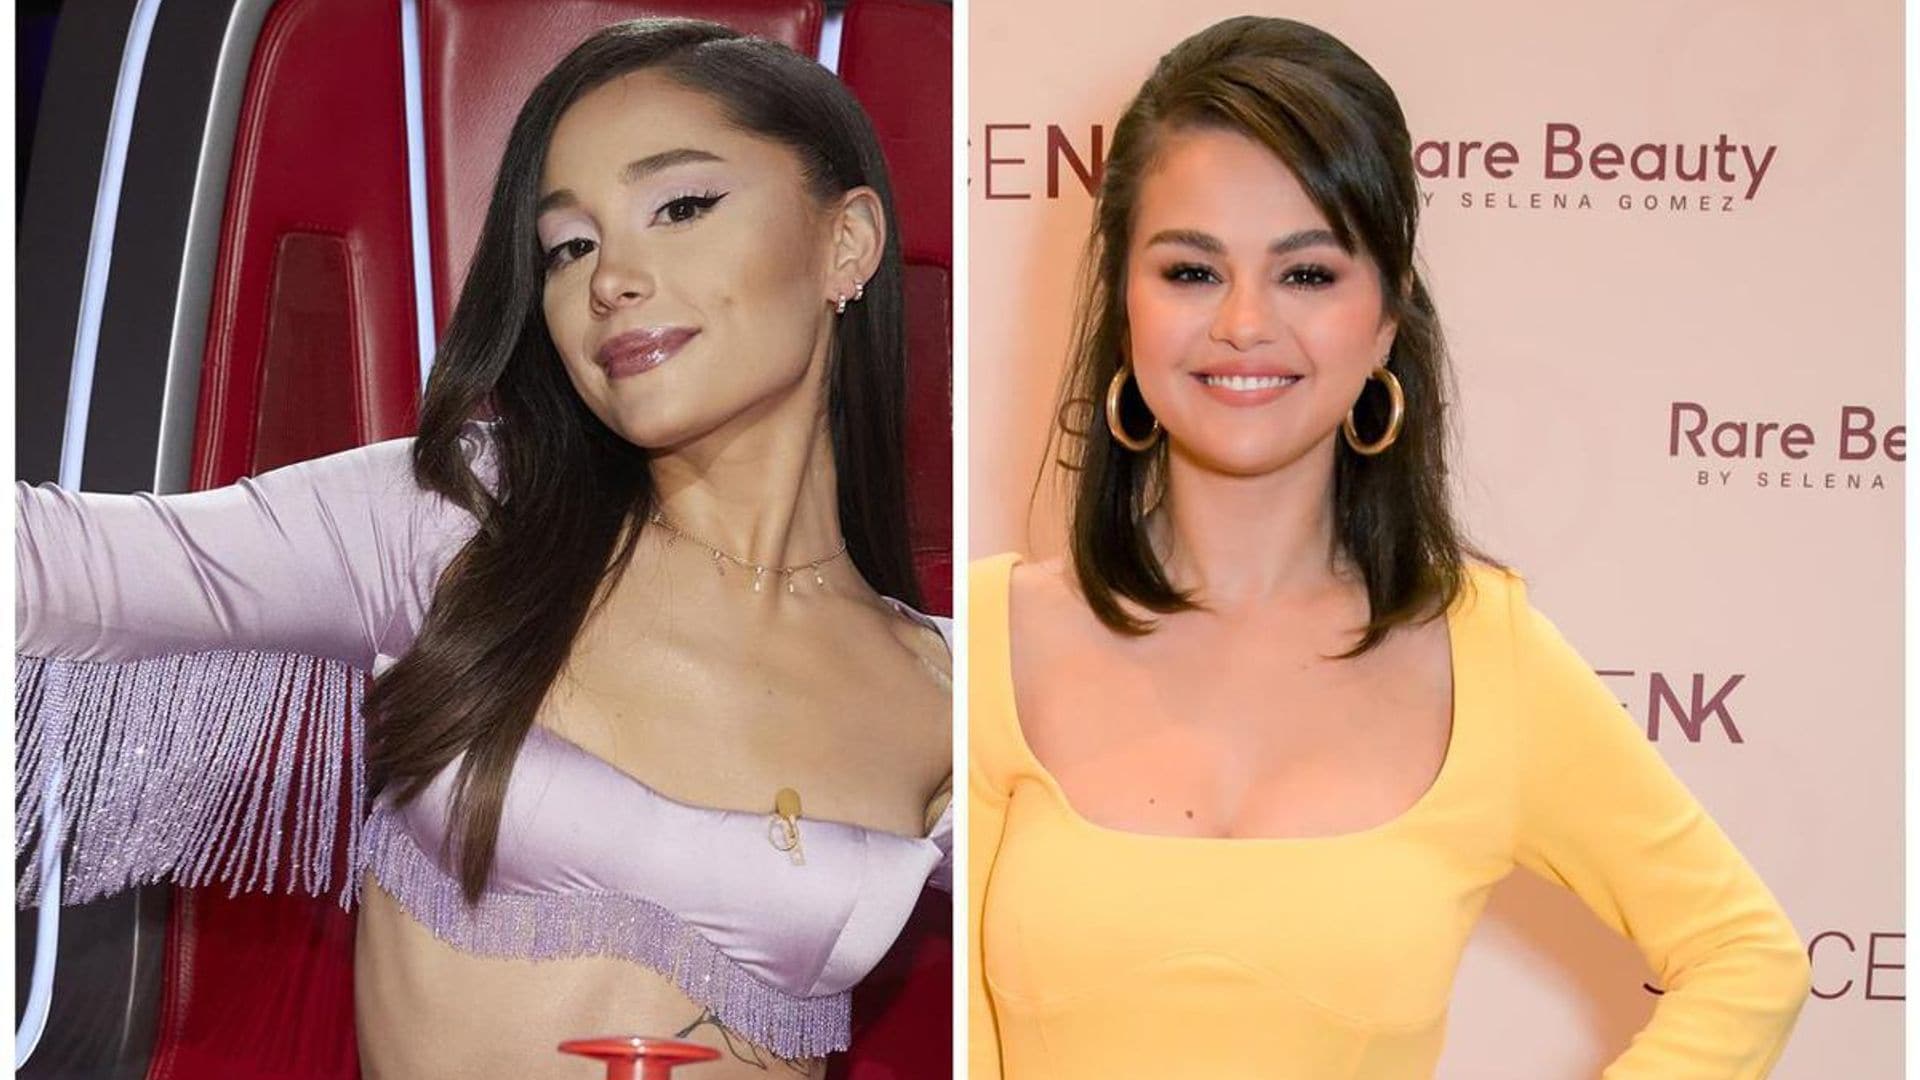 Ariana Grande shows love for Selena Gomez after she used her song in her last TikTok